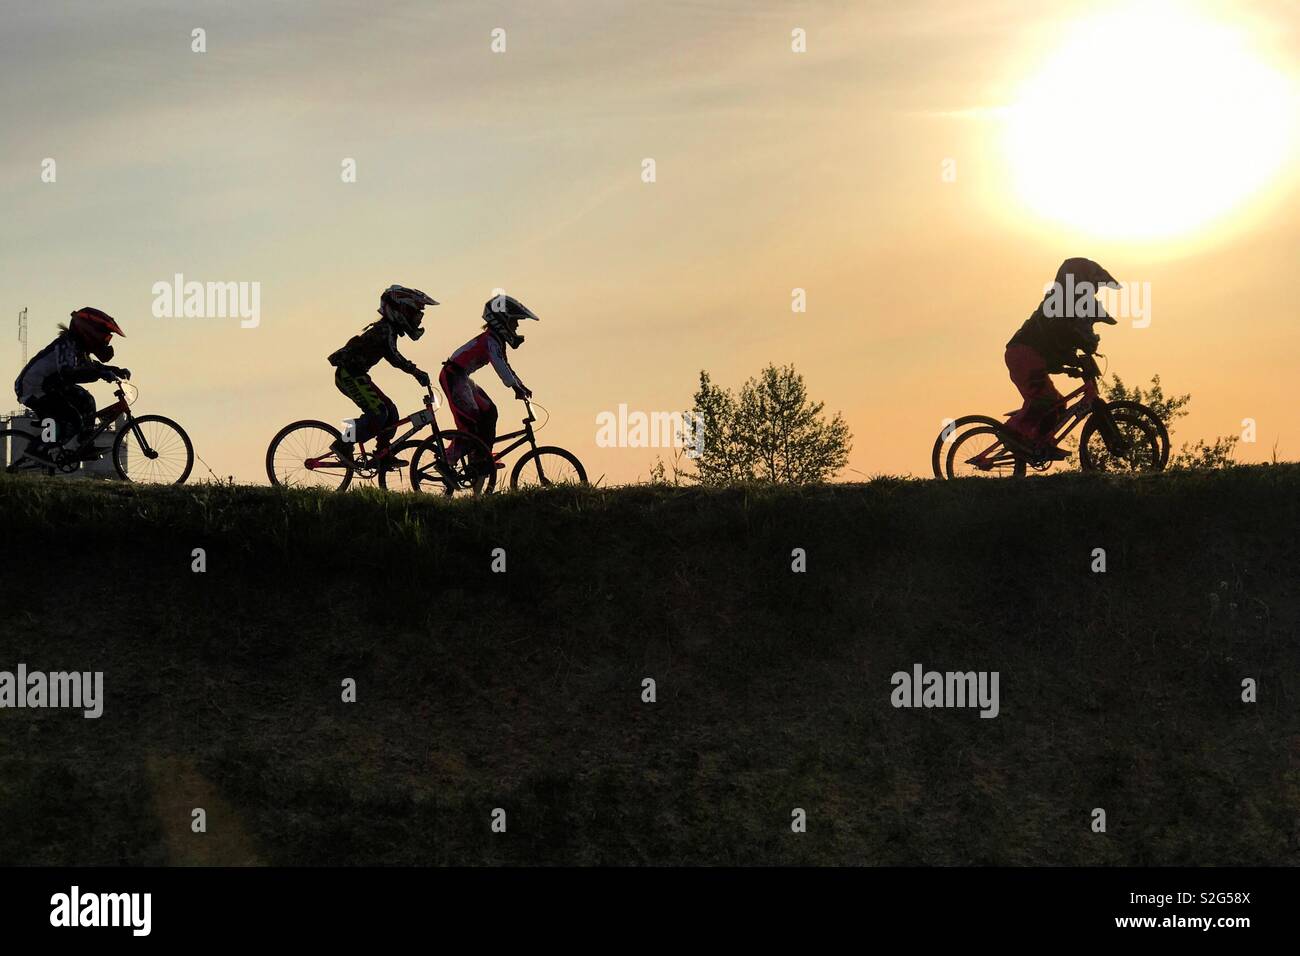 Young BMX racers silhouetted during a race. Stock Photo